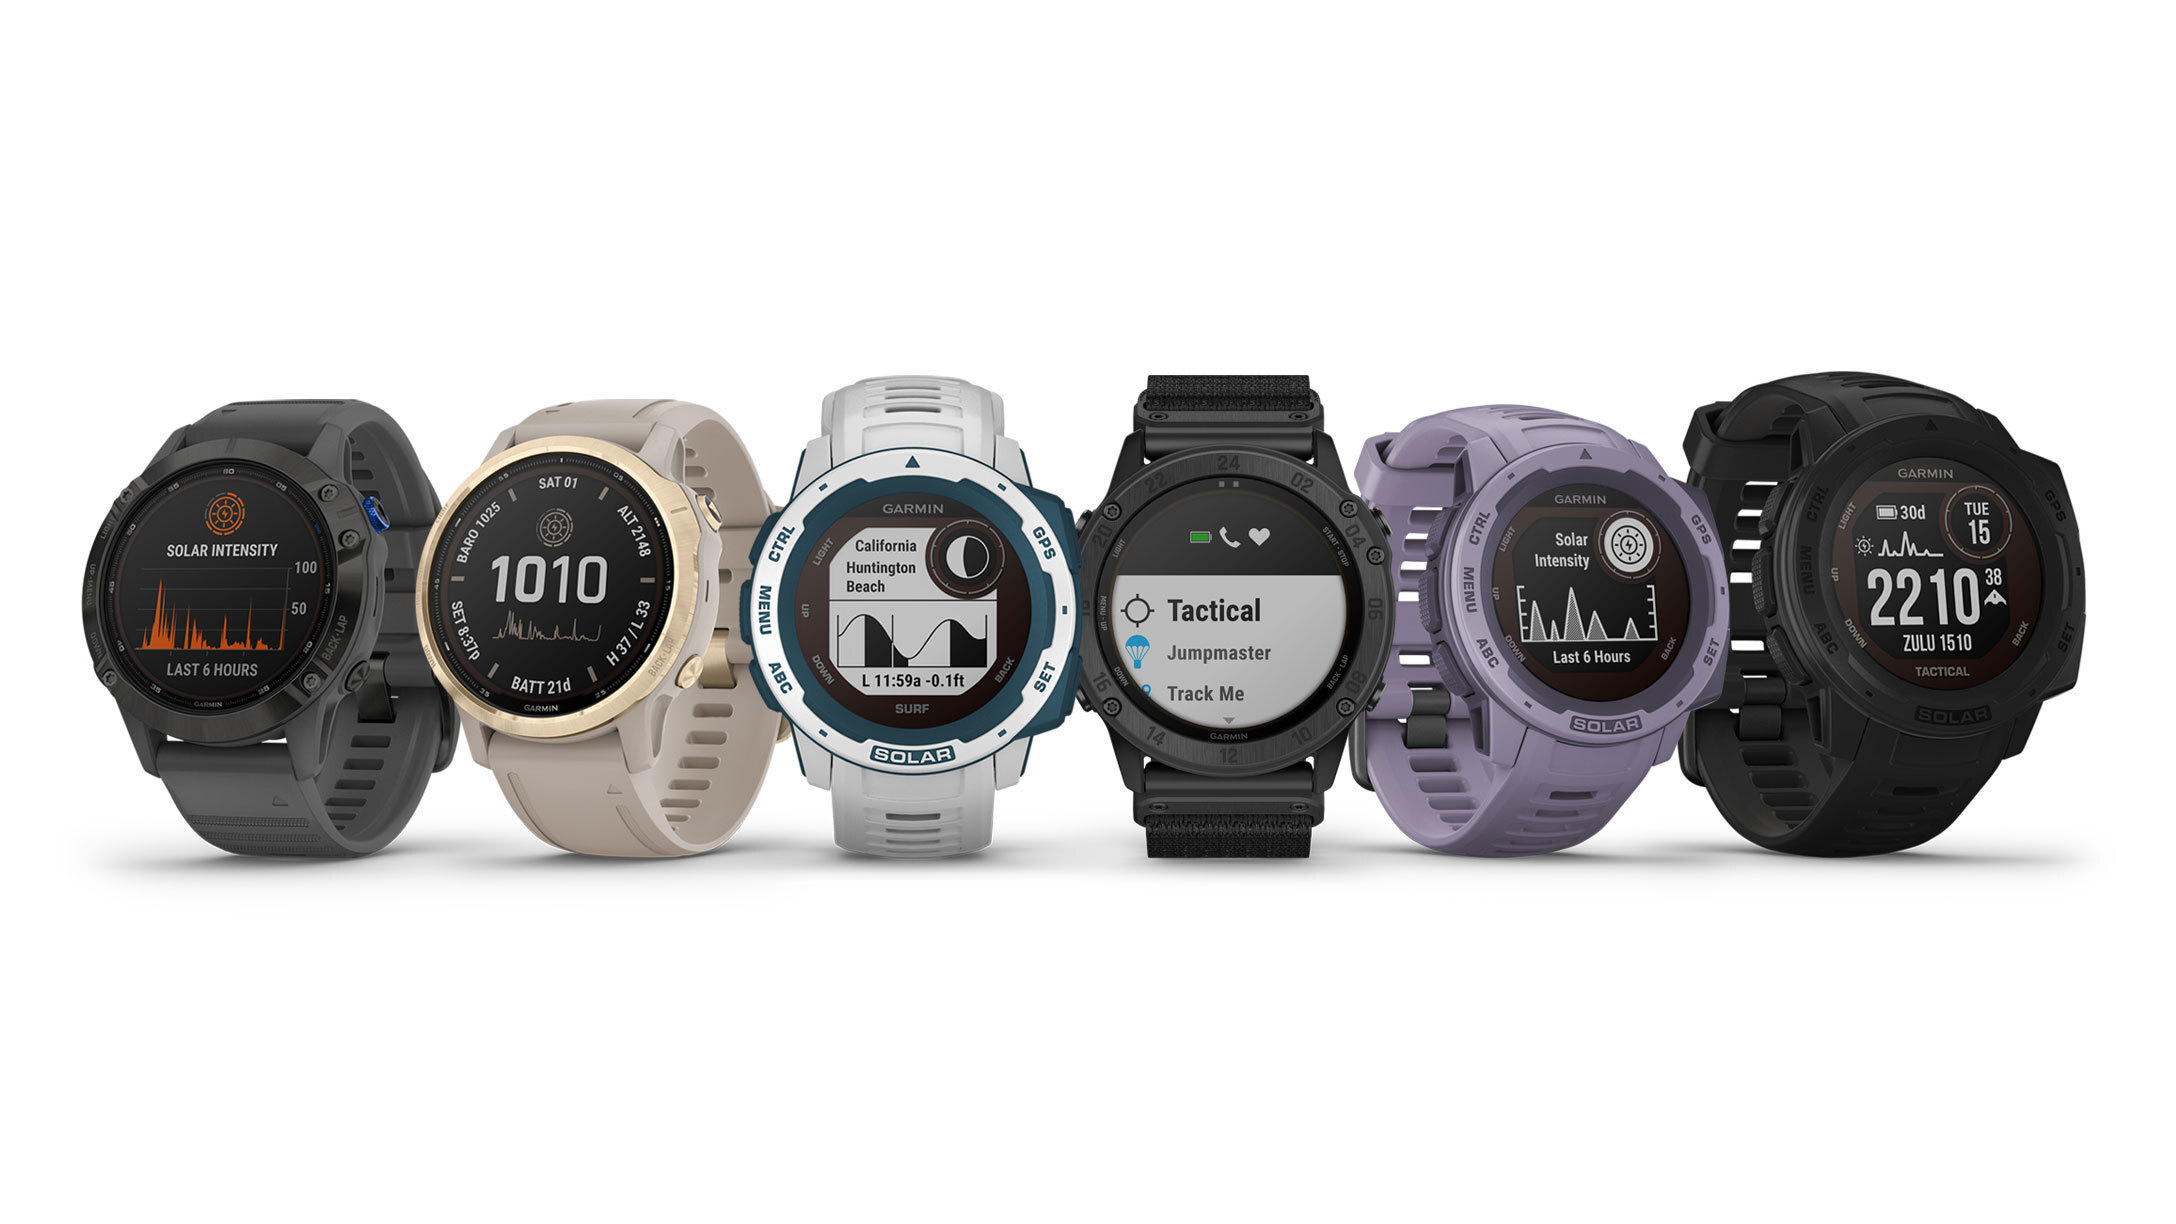 Garmin launches Solar powered Smartwatches, refreshed versions of 